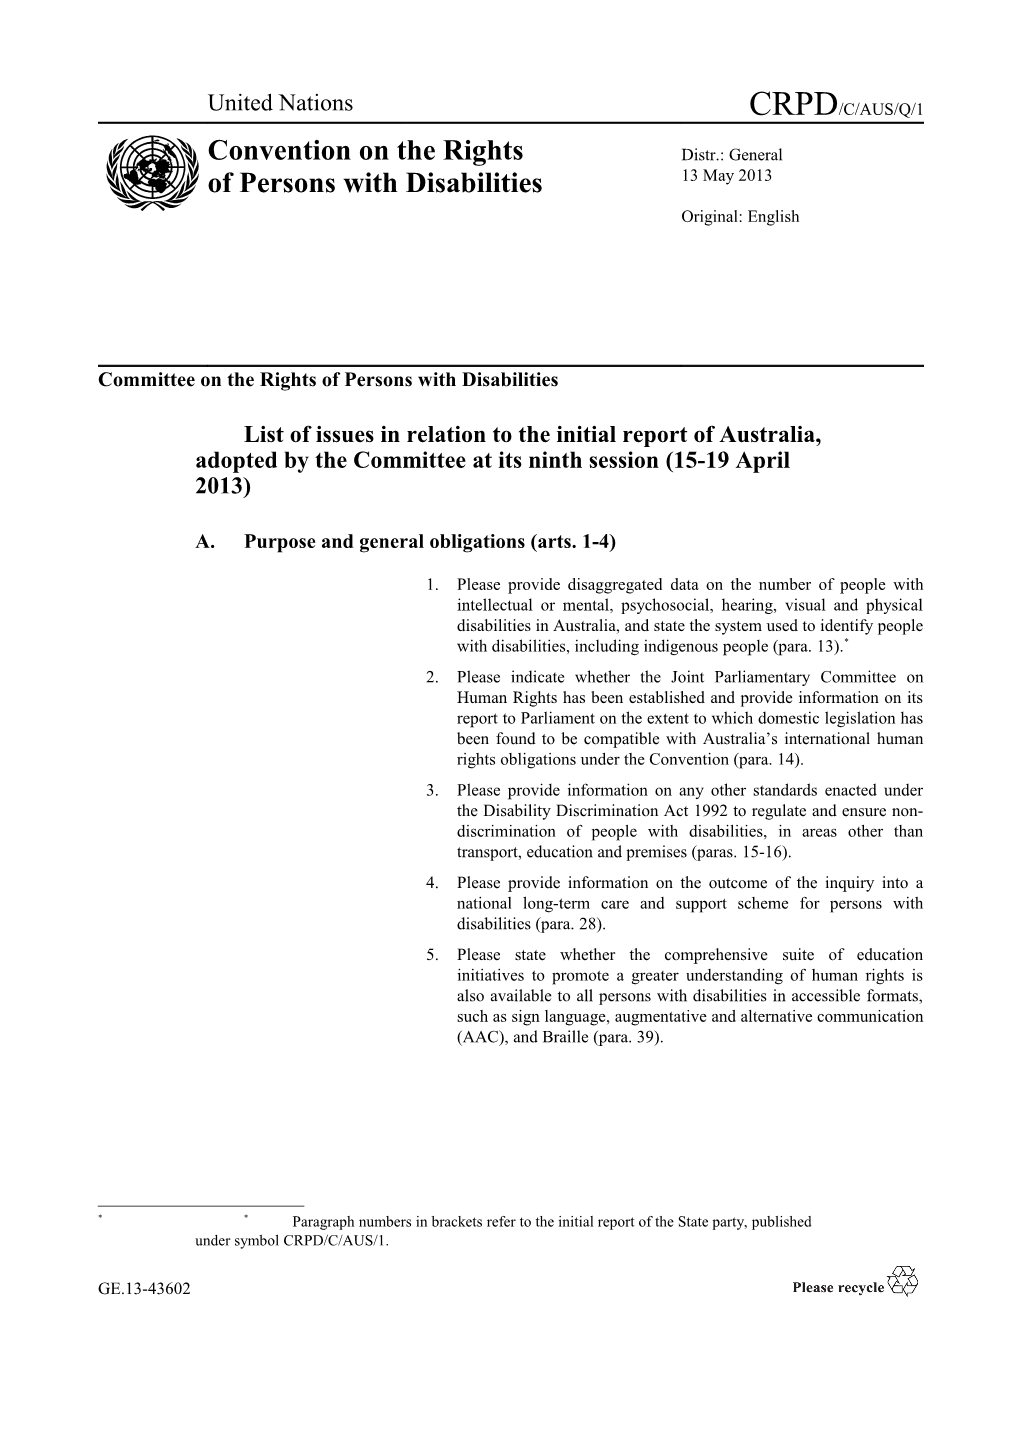 Committee on the Rights of Persons with Disabilities s9